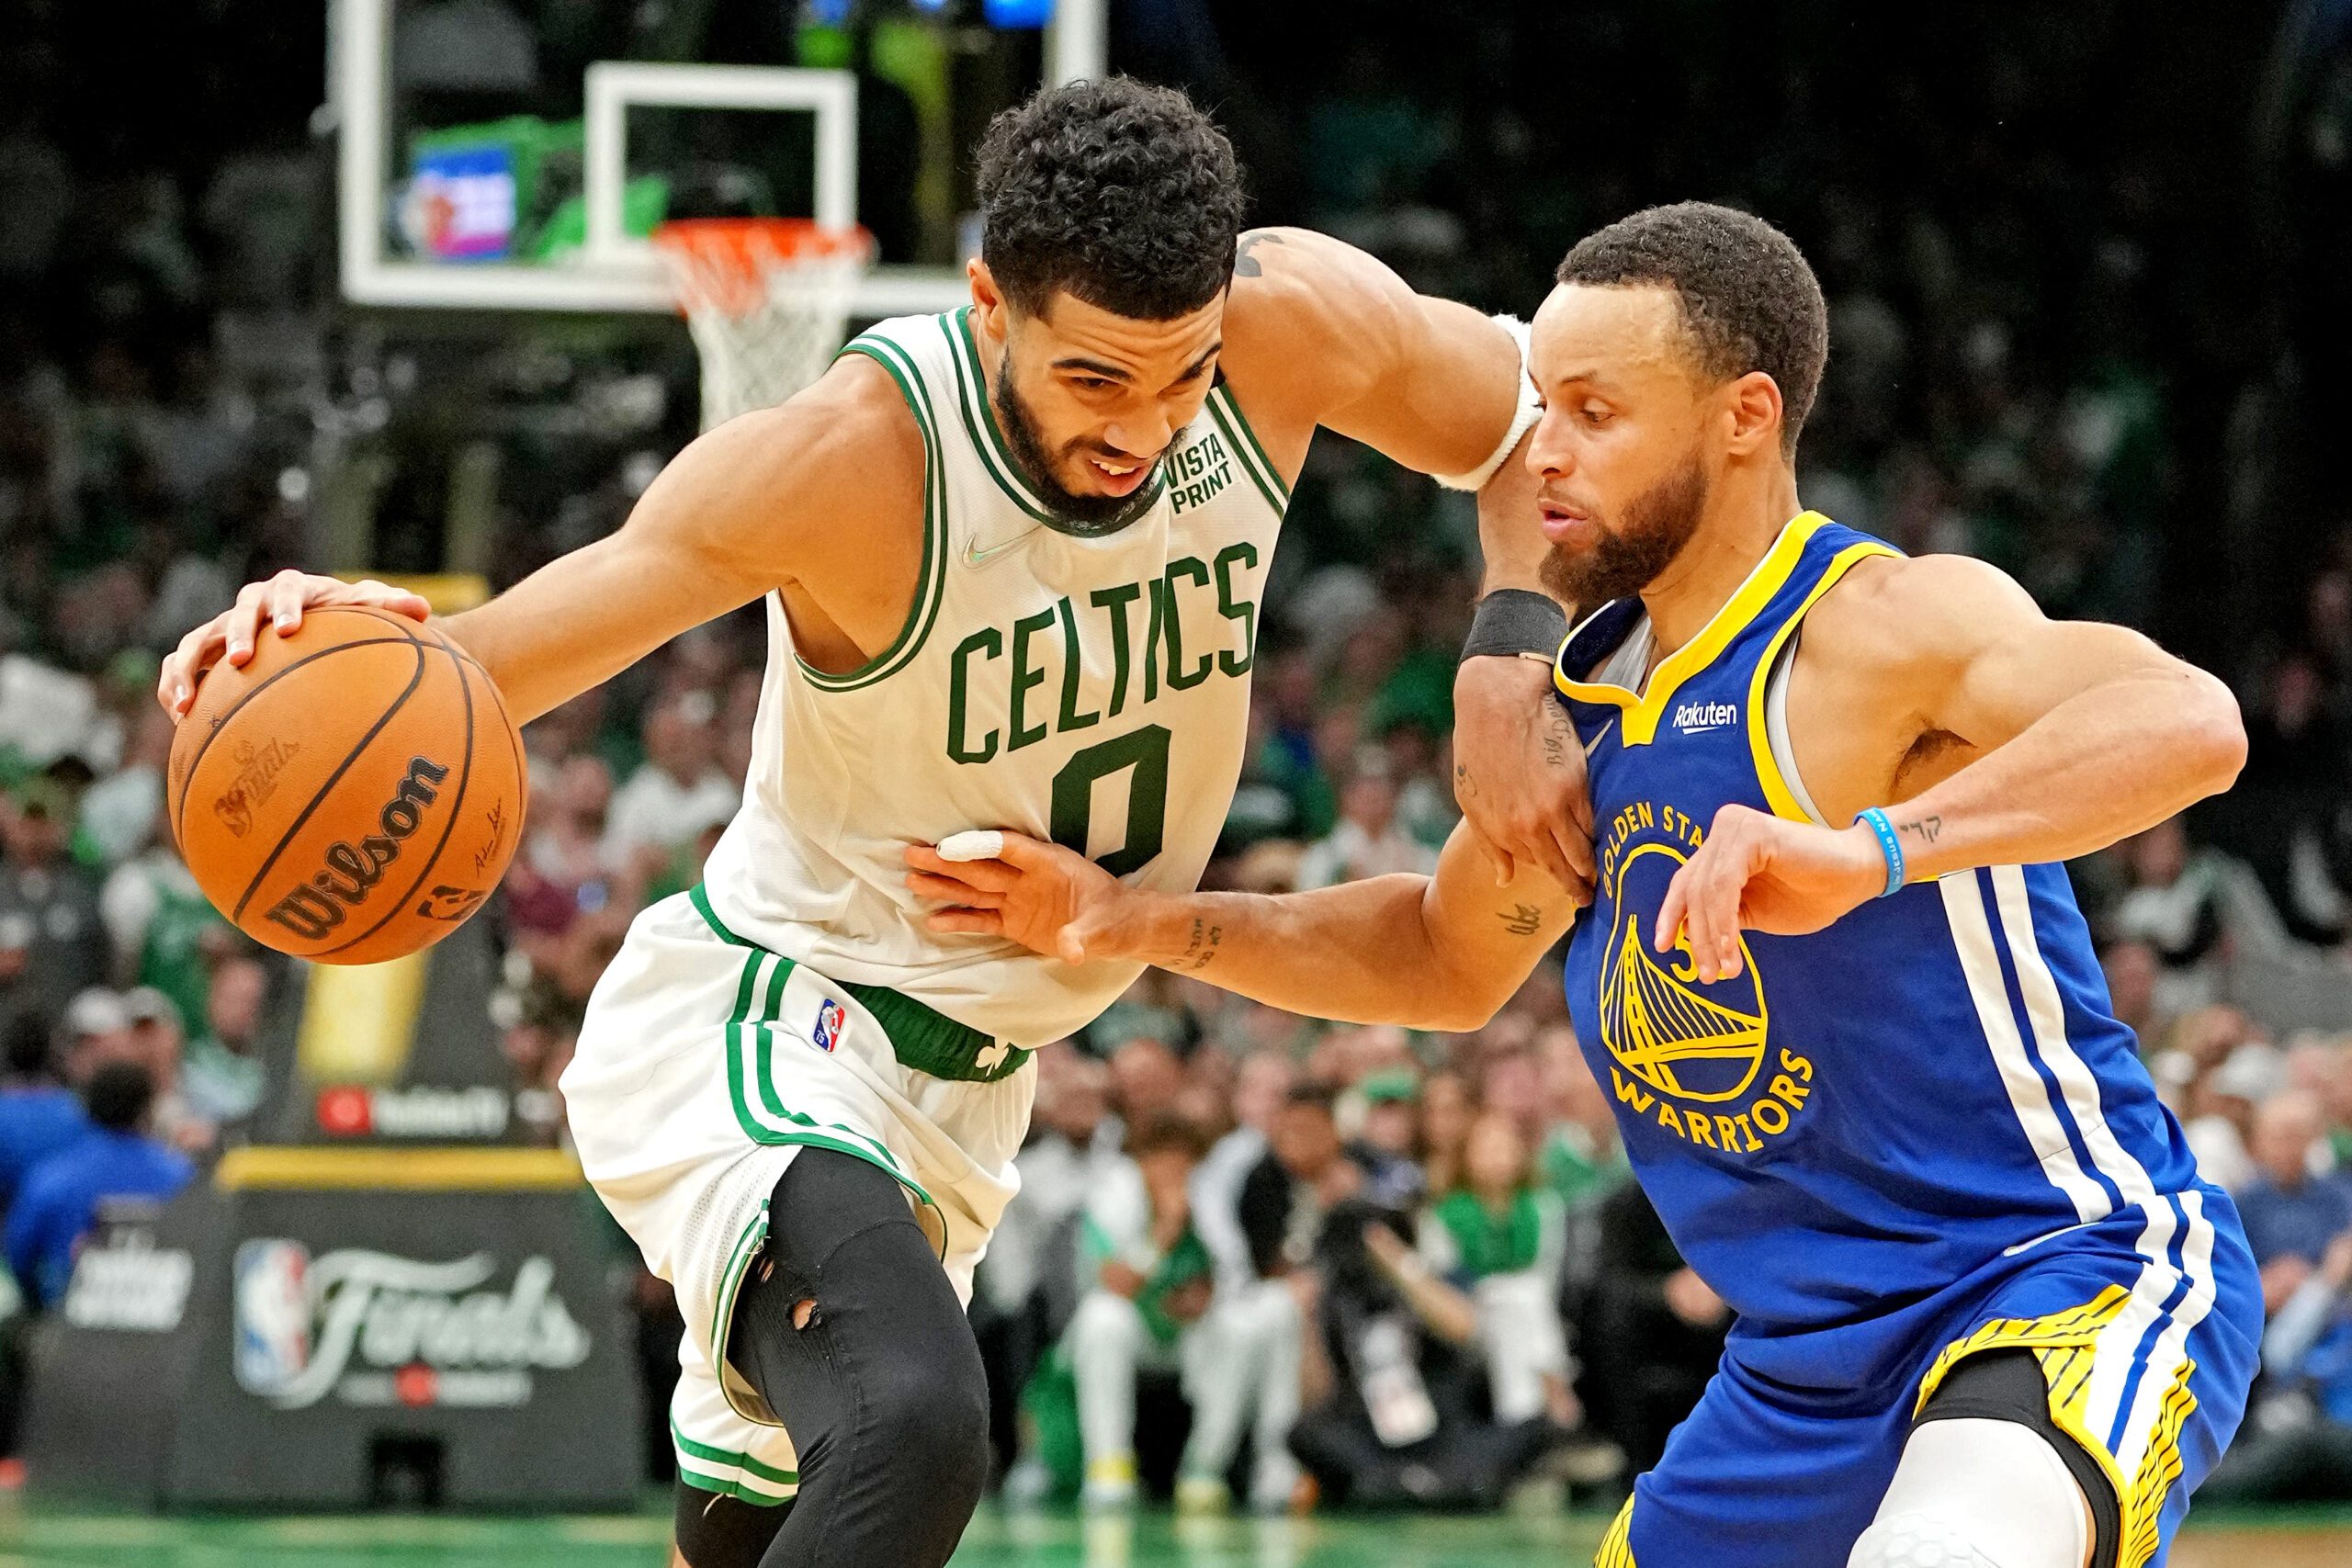 Stephen Curry, Warriors close out Celtics for 4th title in 8 years